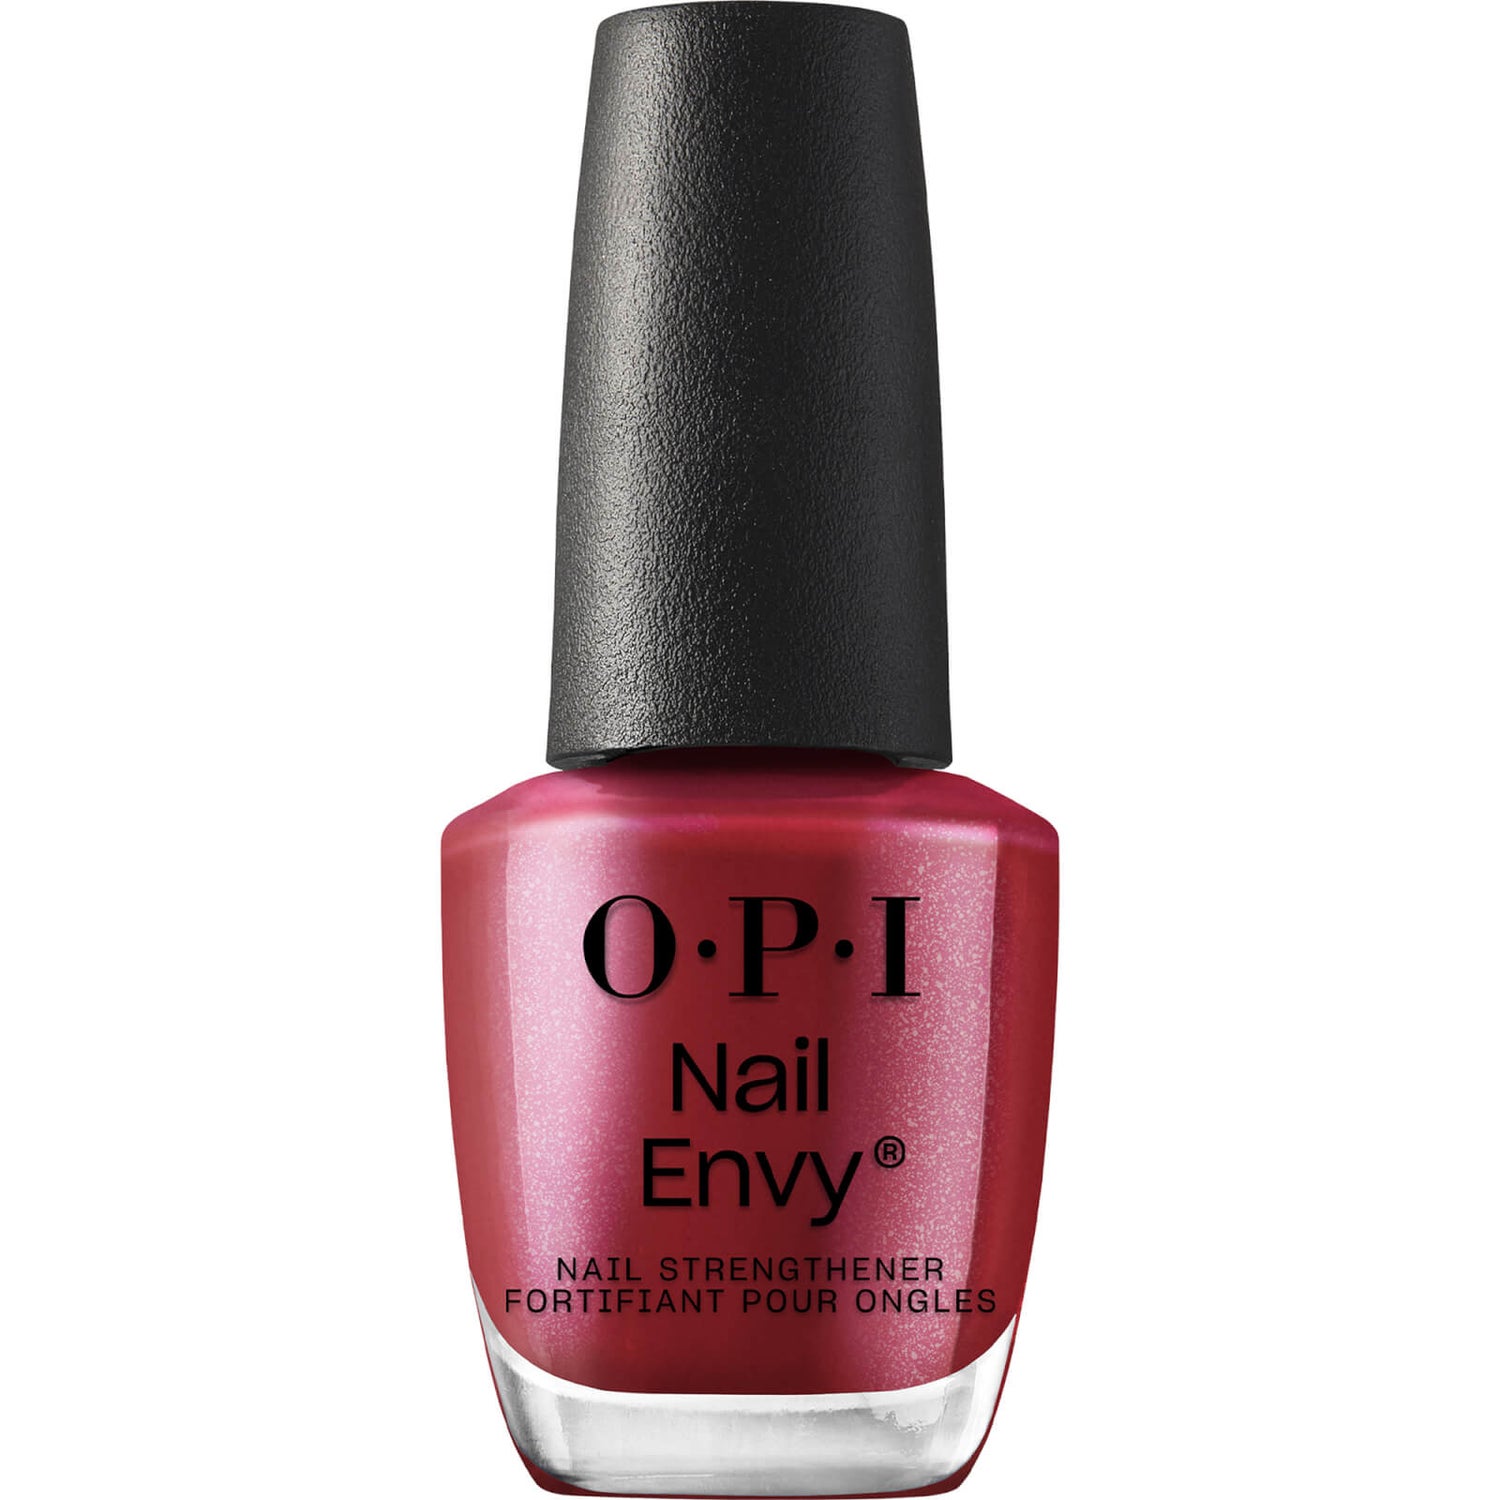 OPI Nail Envy Nail Strengthener (Color Collection), .5 oz - NT223 | Marlo  Beauty Supply